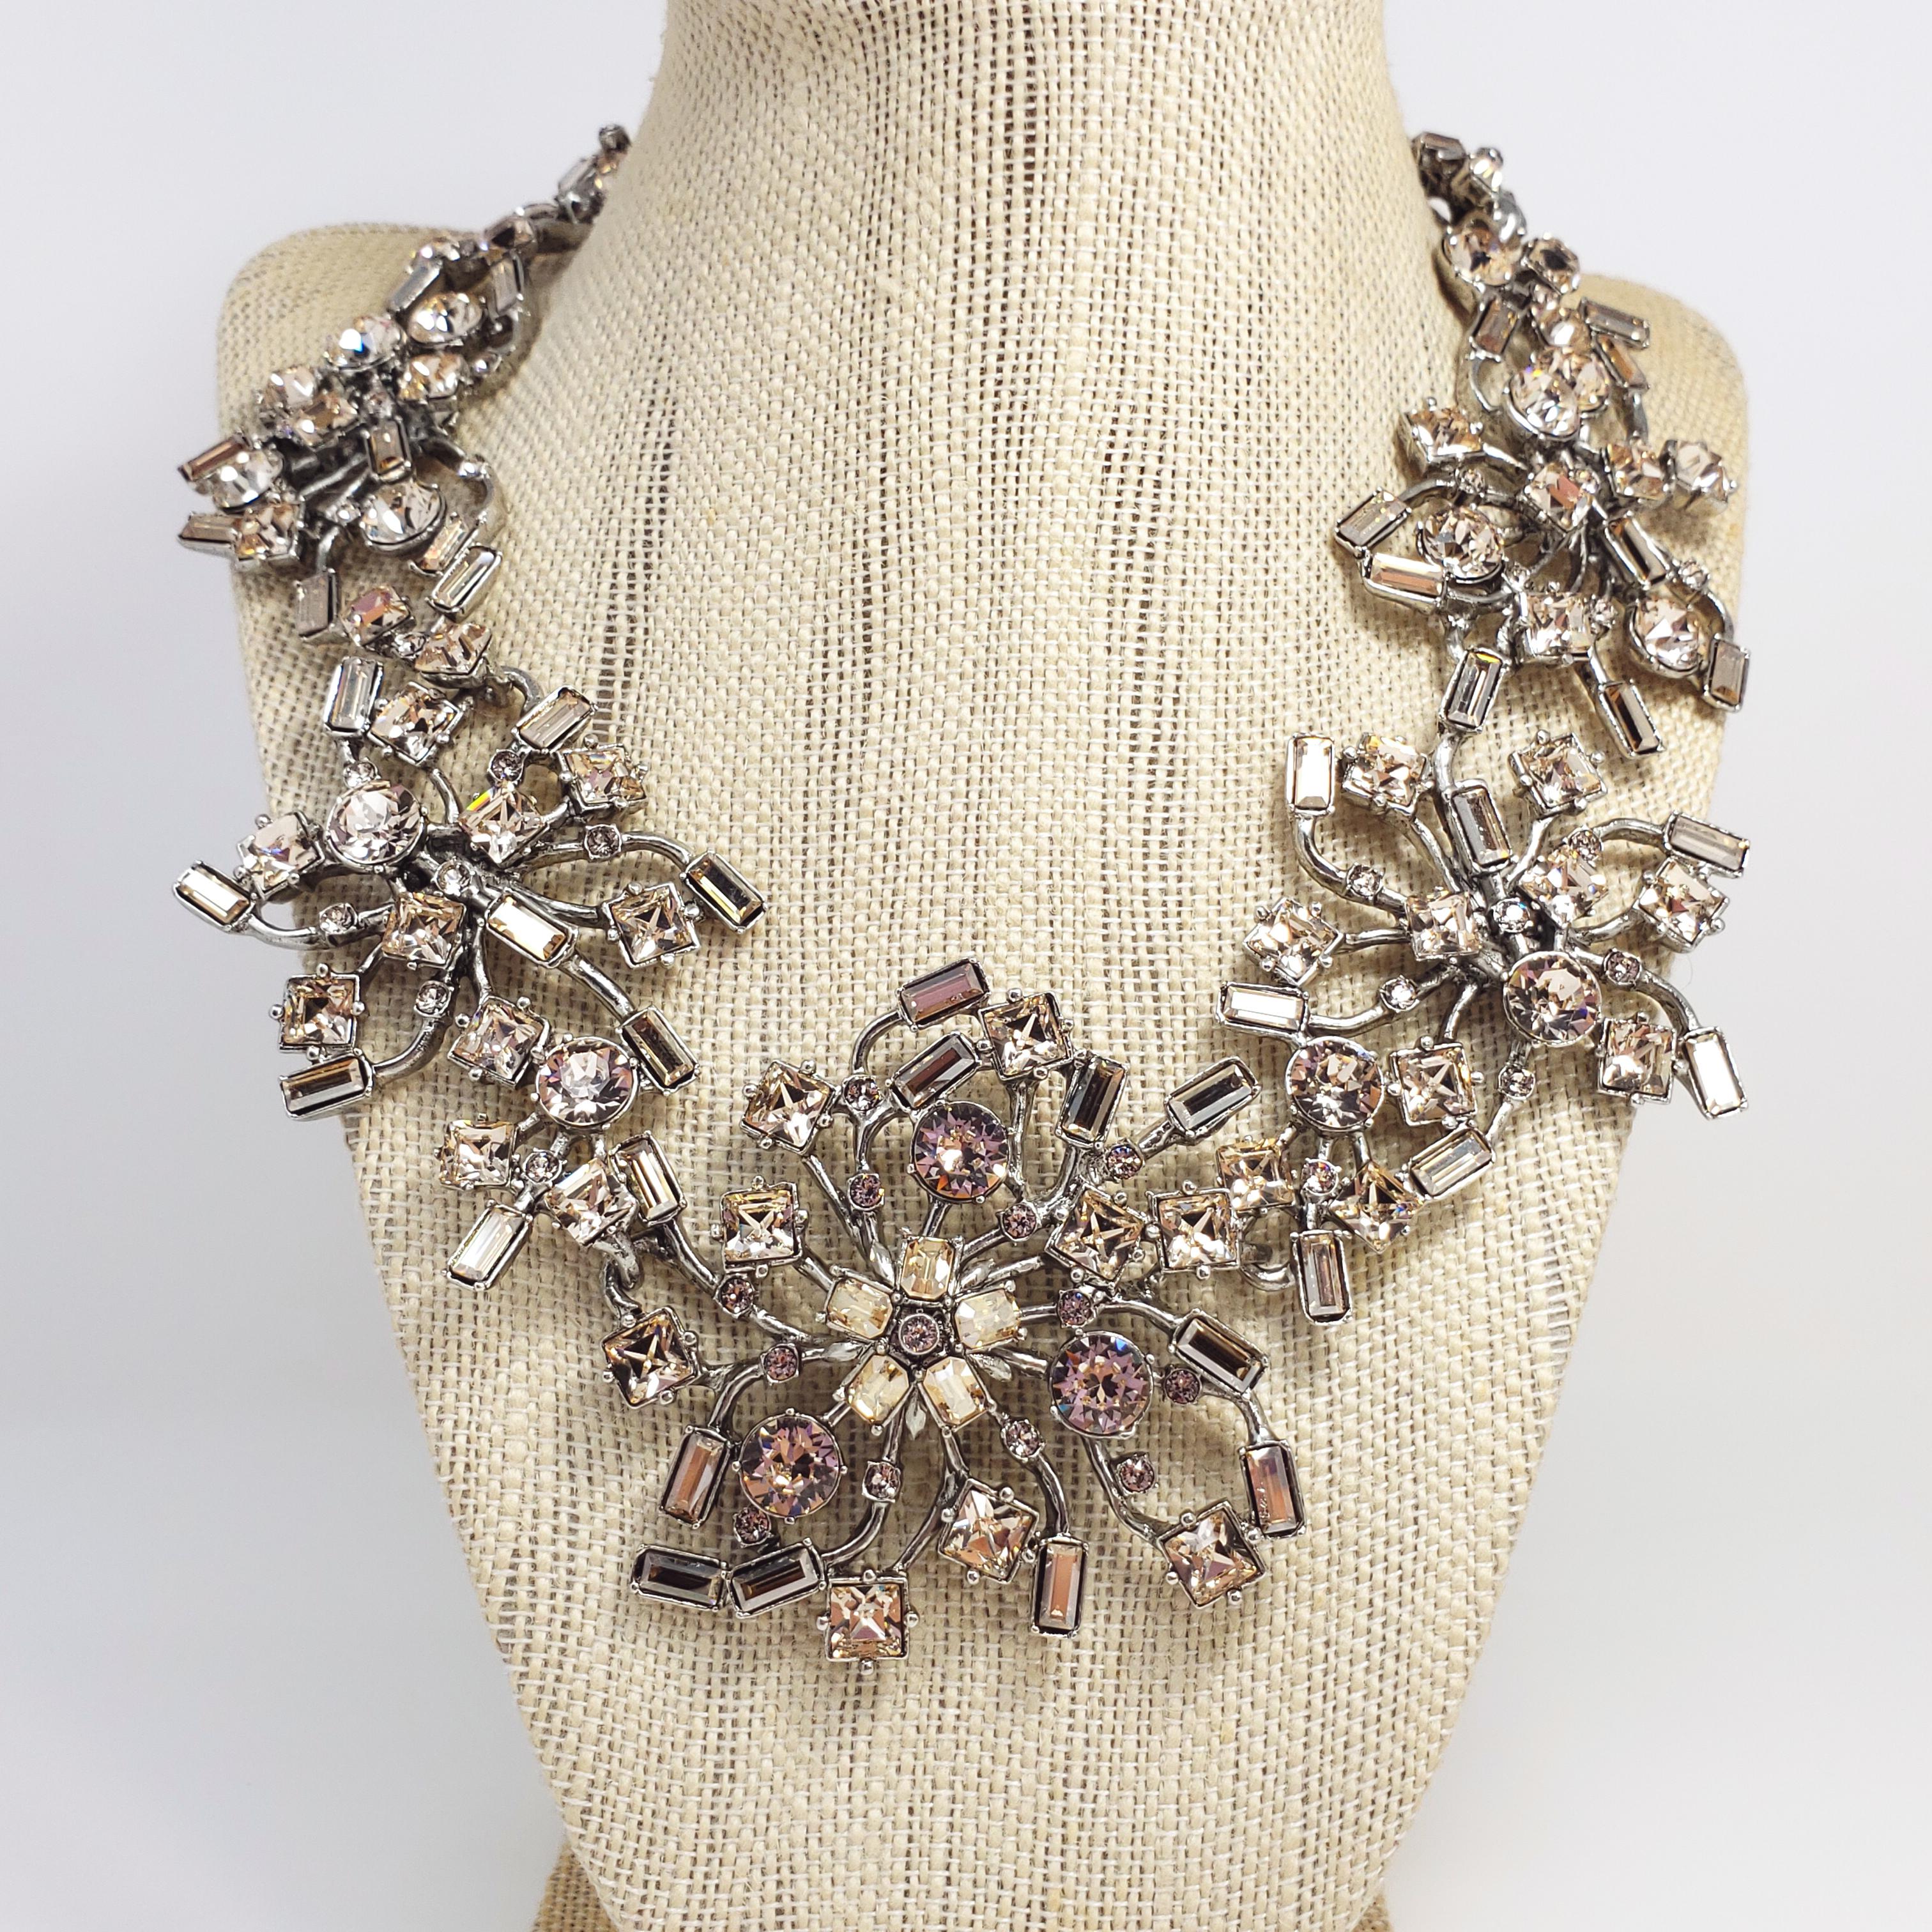 A dazzling necklace by Oscar de la Renta. Features translucent, smoky topaz crystals in round, square, and emerald cuts. Prong set on contemporary-styled floral motif silvertone setting. Lavish!

Hallmarks: Oscar de la Renta, Made in USA
Largest